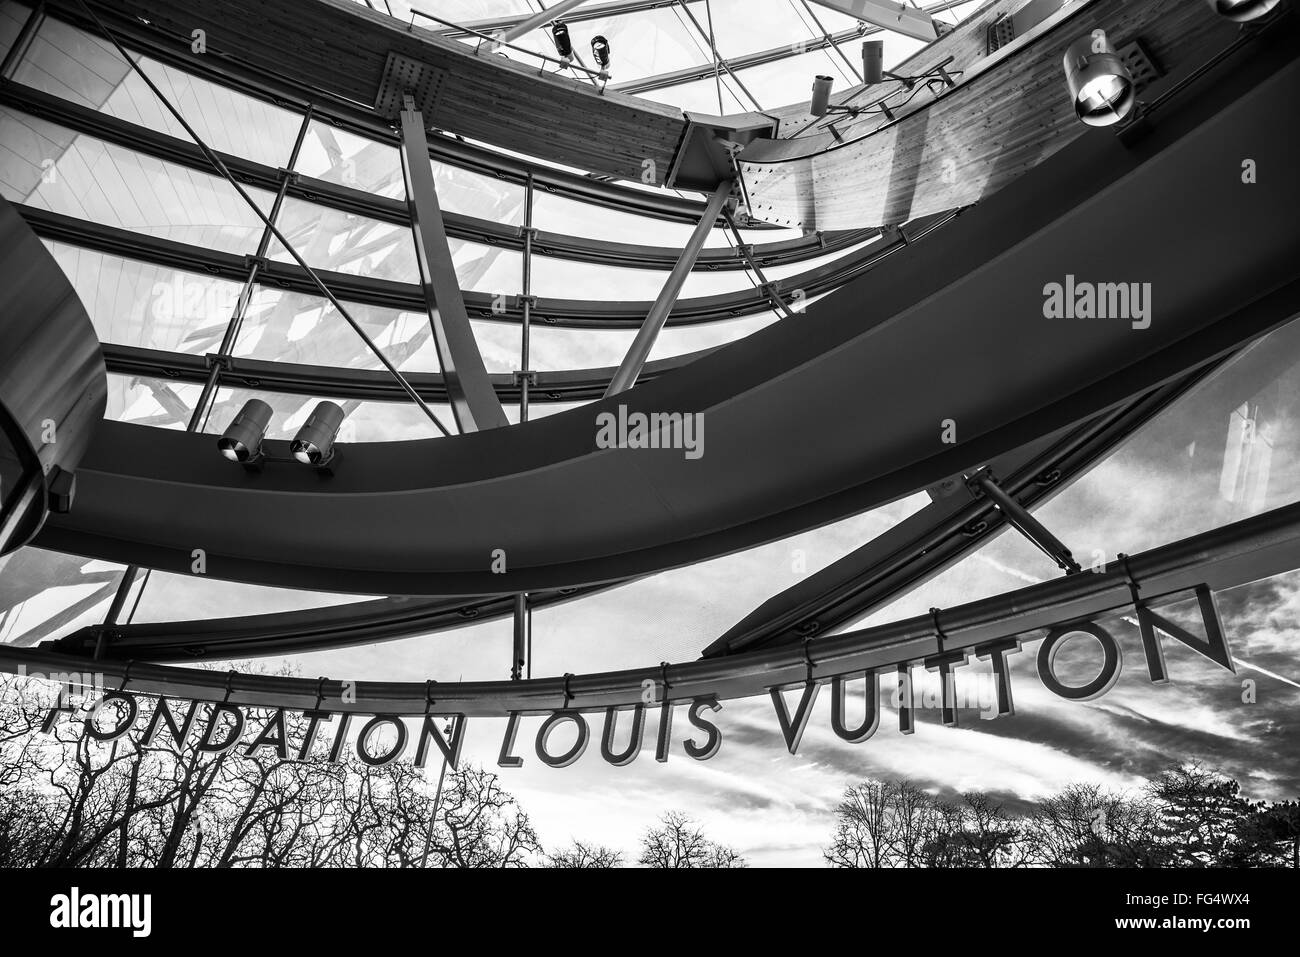 Vuitton Black and White Stock Photos & Images - Alamy